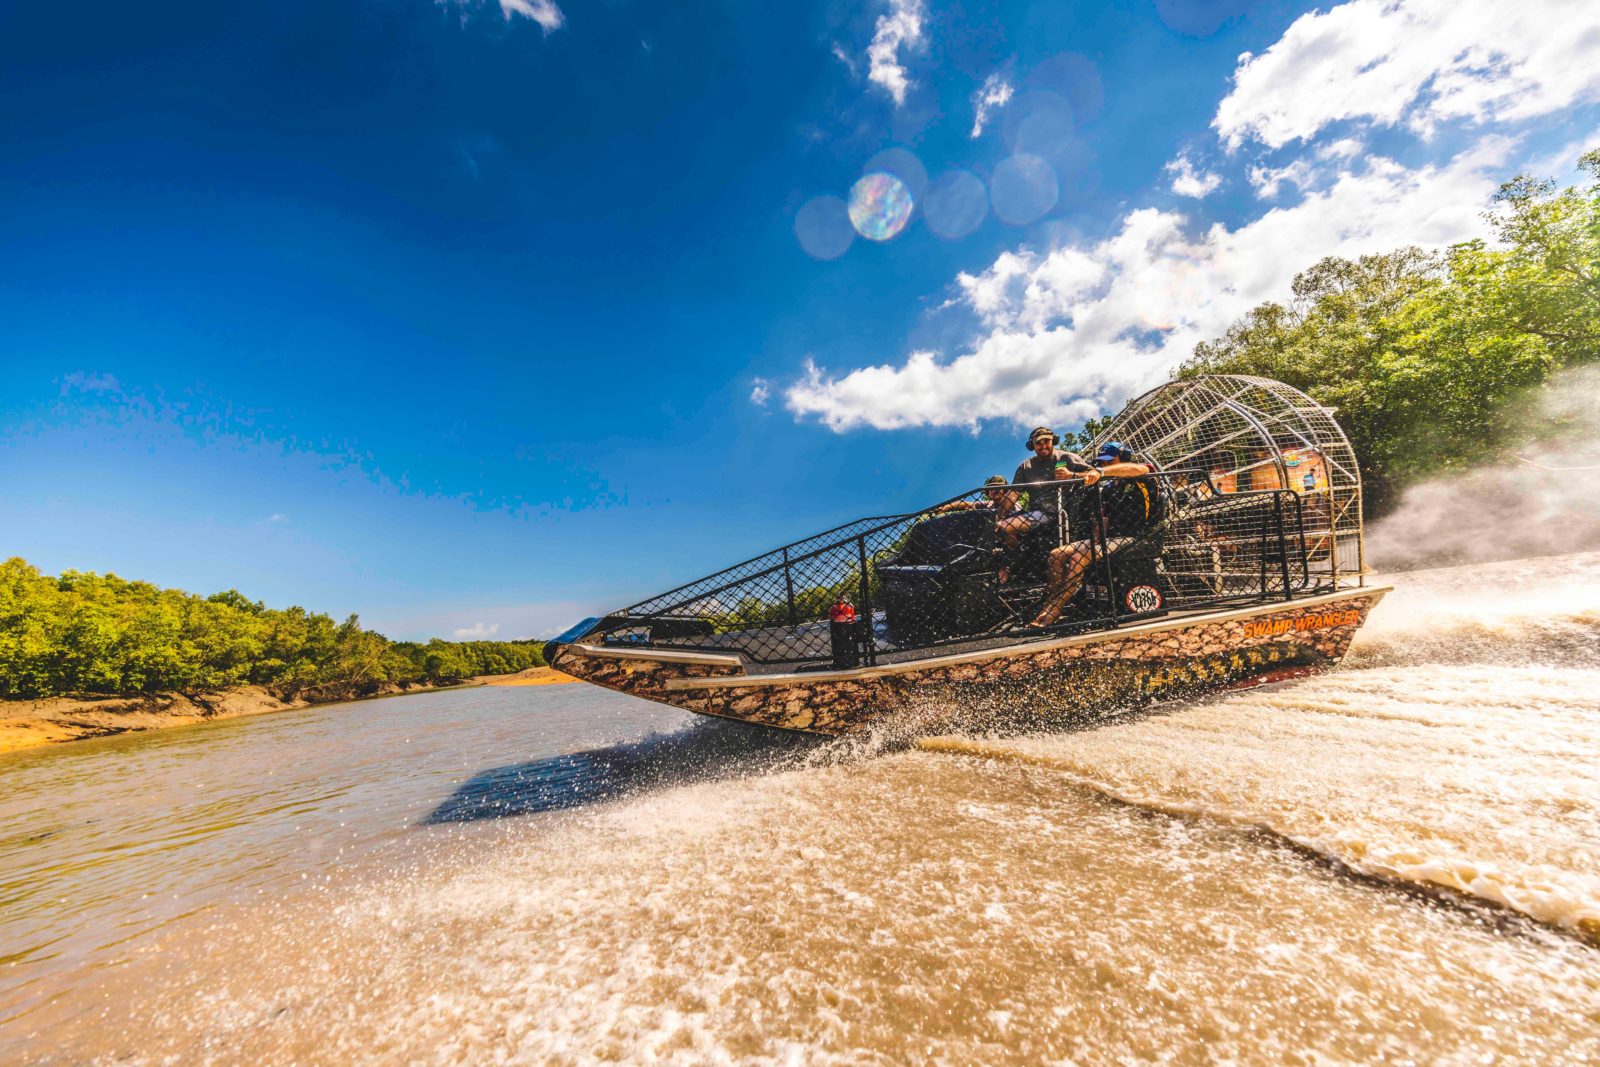 Experience the thrill of an airboat ride!